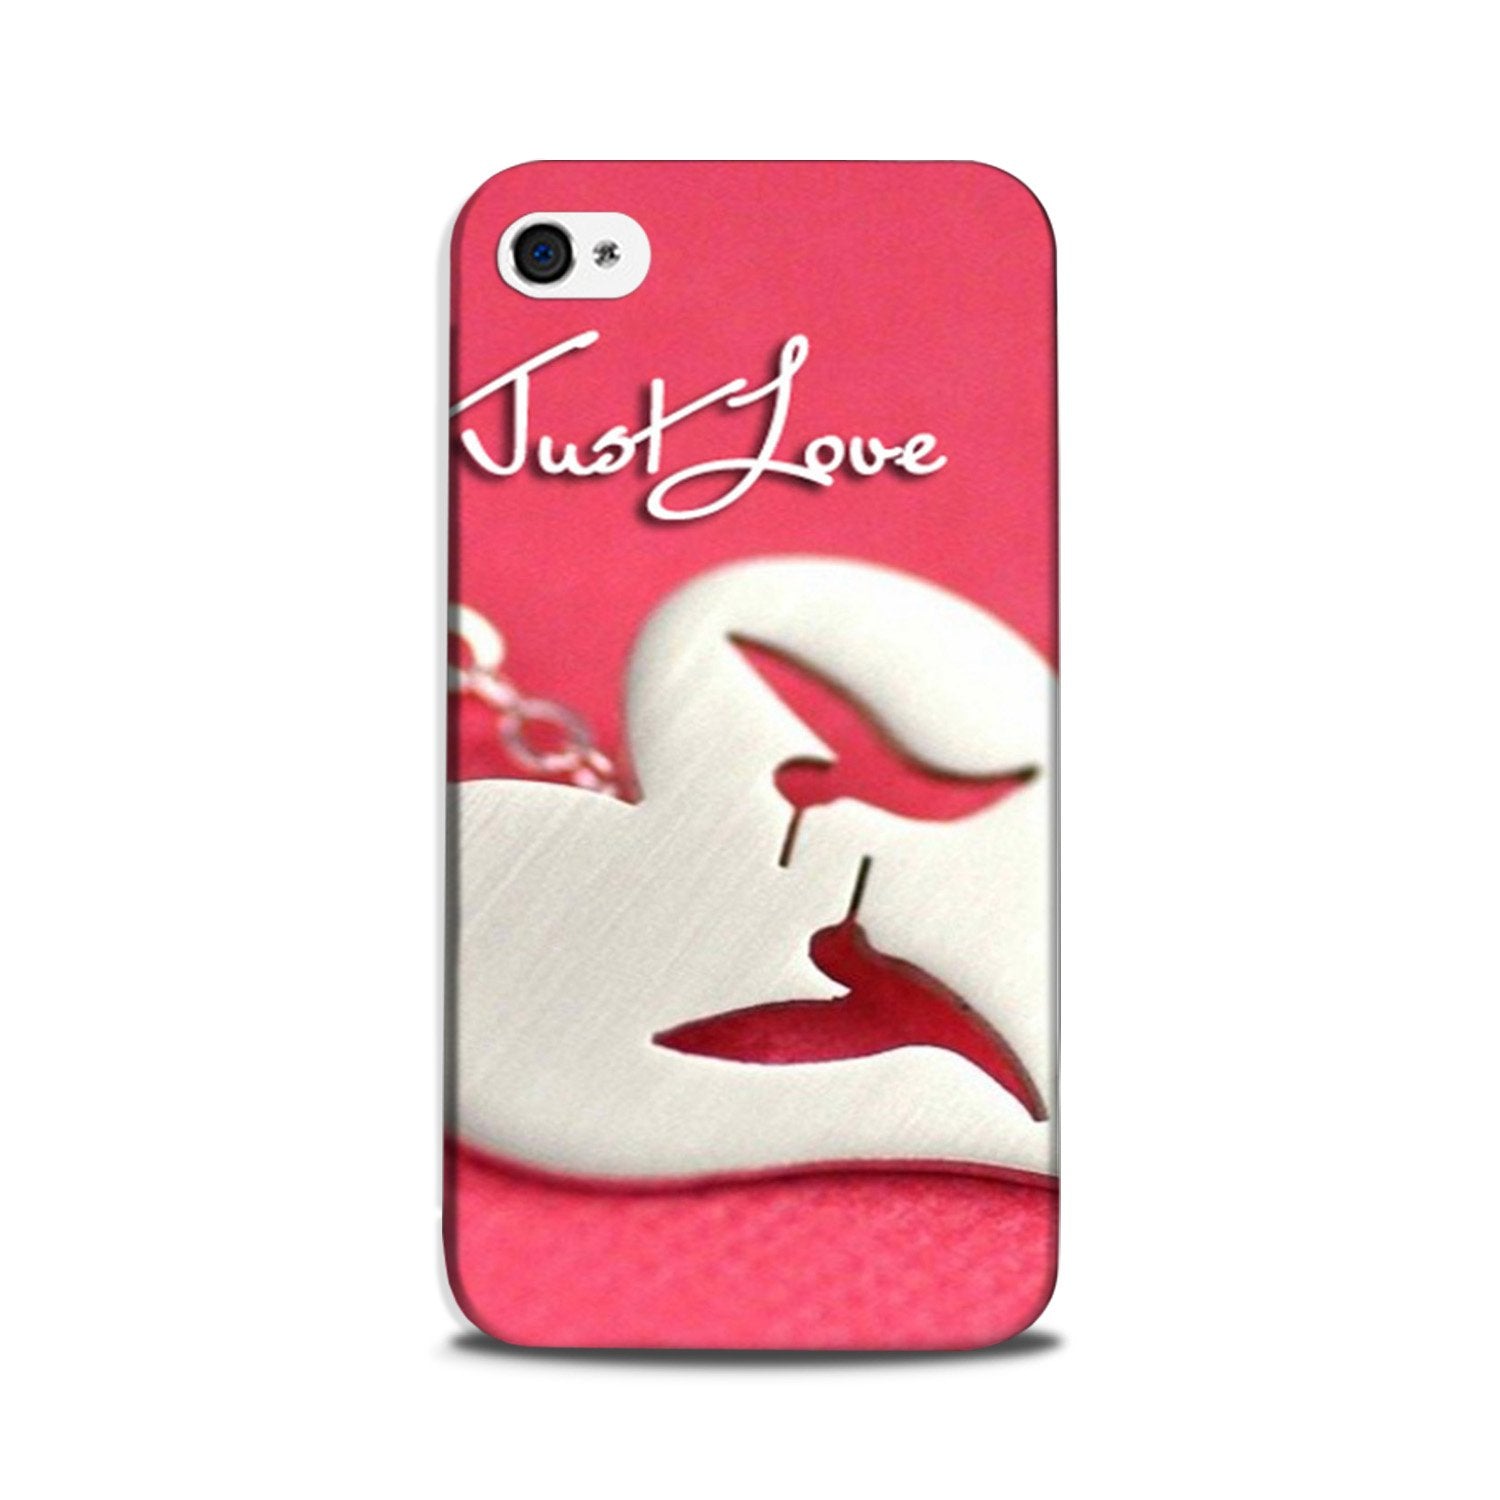 Just love Case for iPhone 5/ 5s